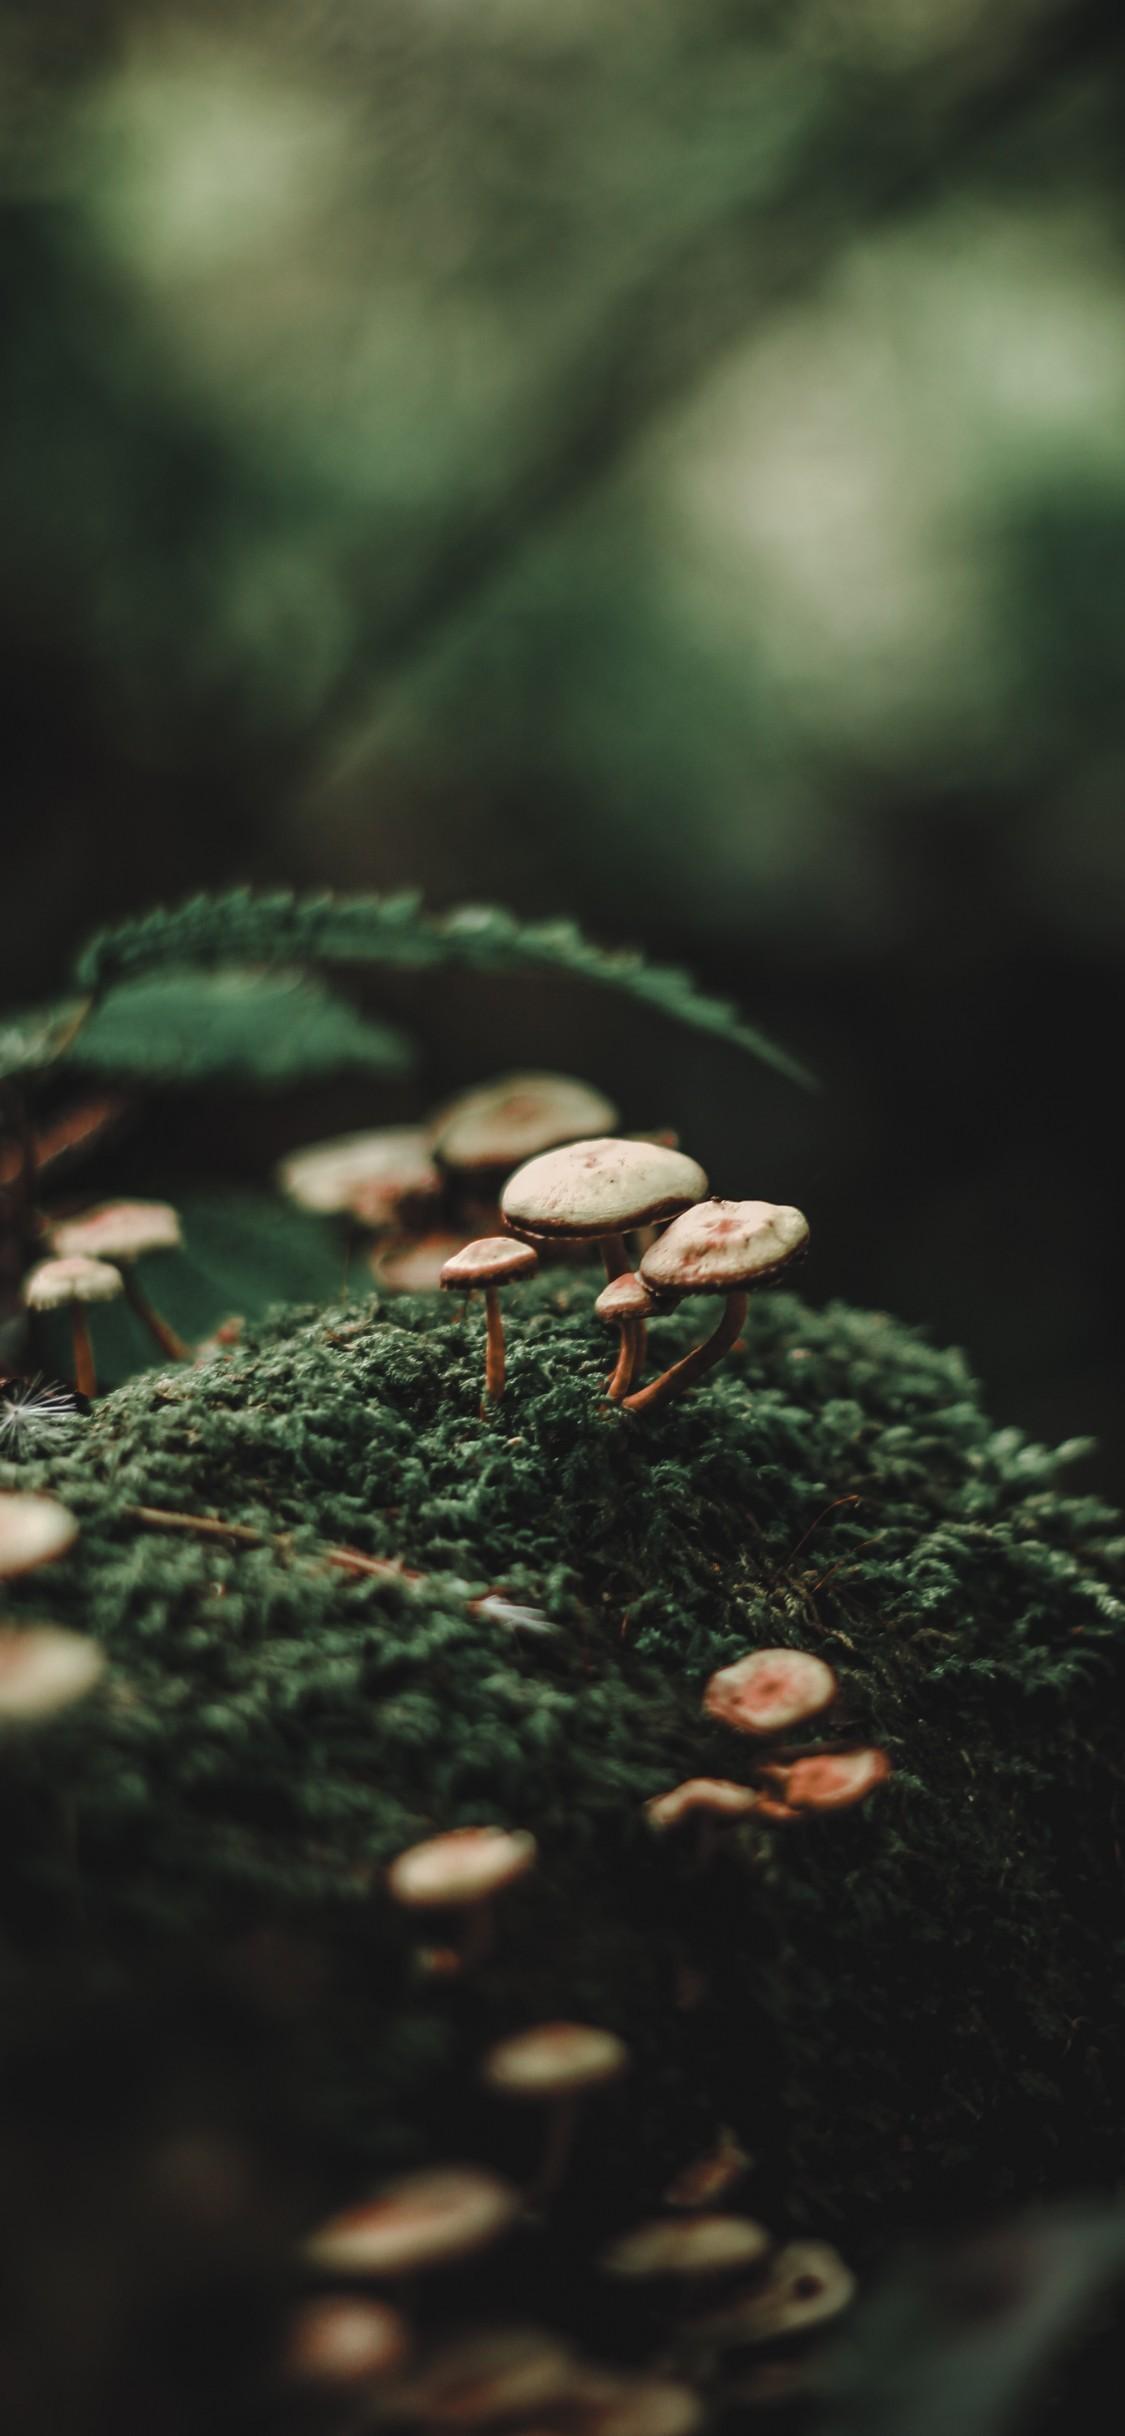 Download 1125x2436 Forest, Moss, Mushrooms, Close Up, Photography